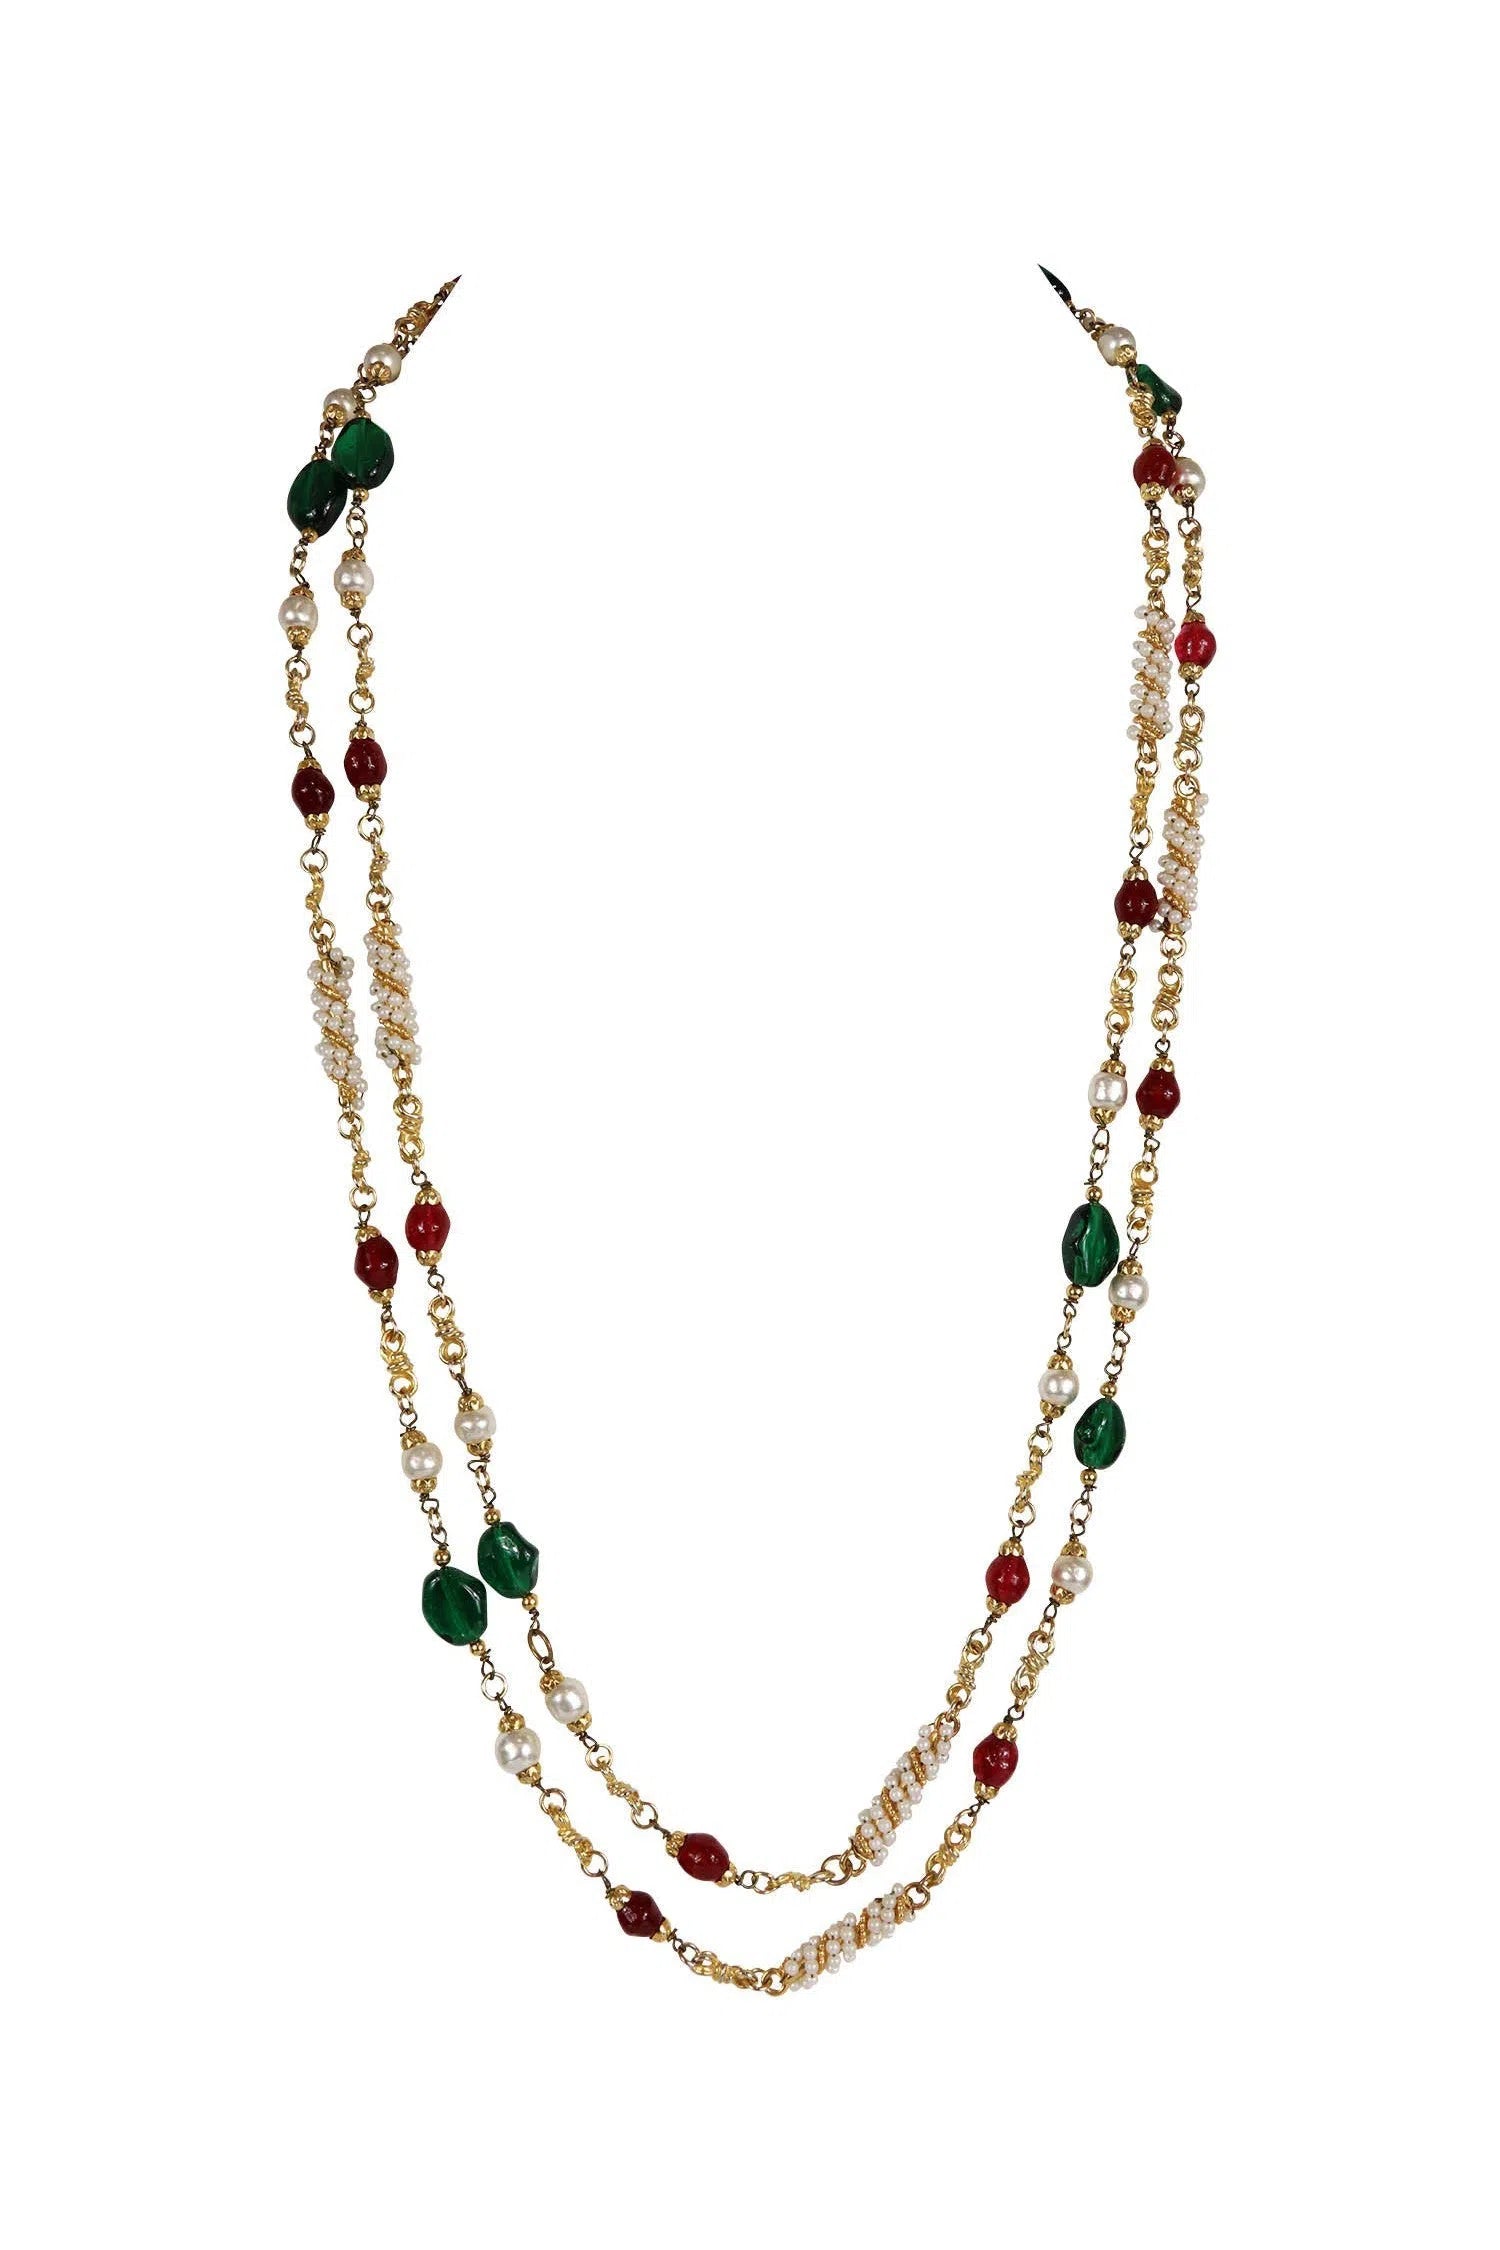 Chanel 1984 Long Red Green Gripoix Pearl Sautoir Necklace - Foxy Couture Carmel